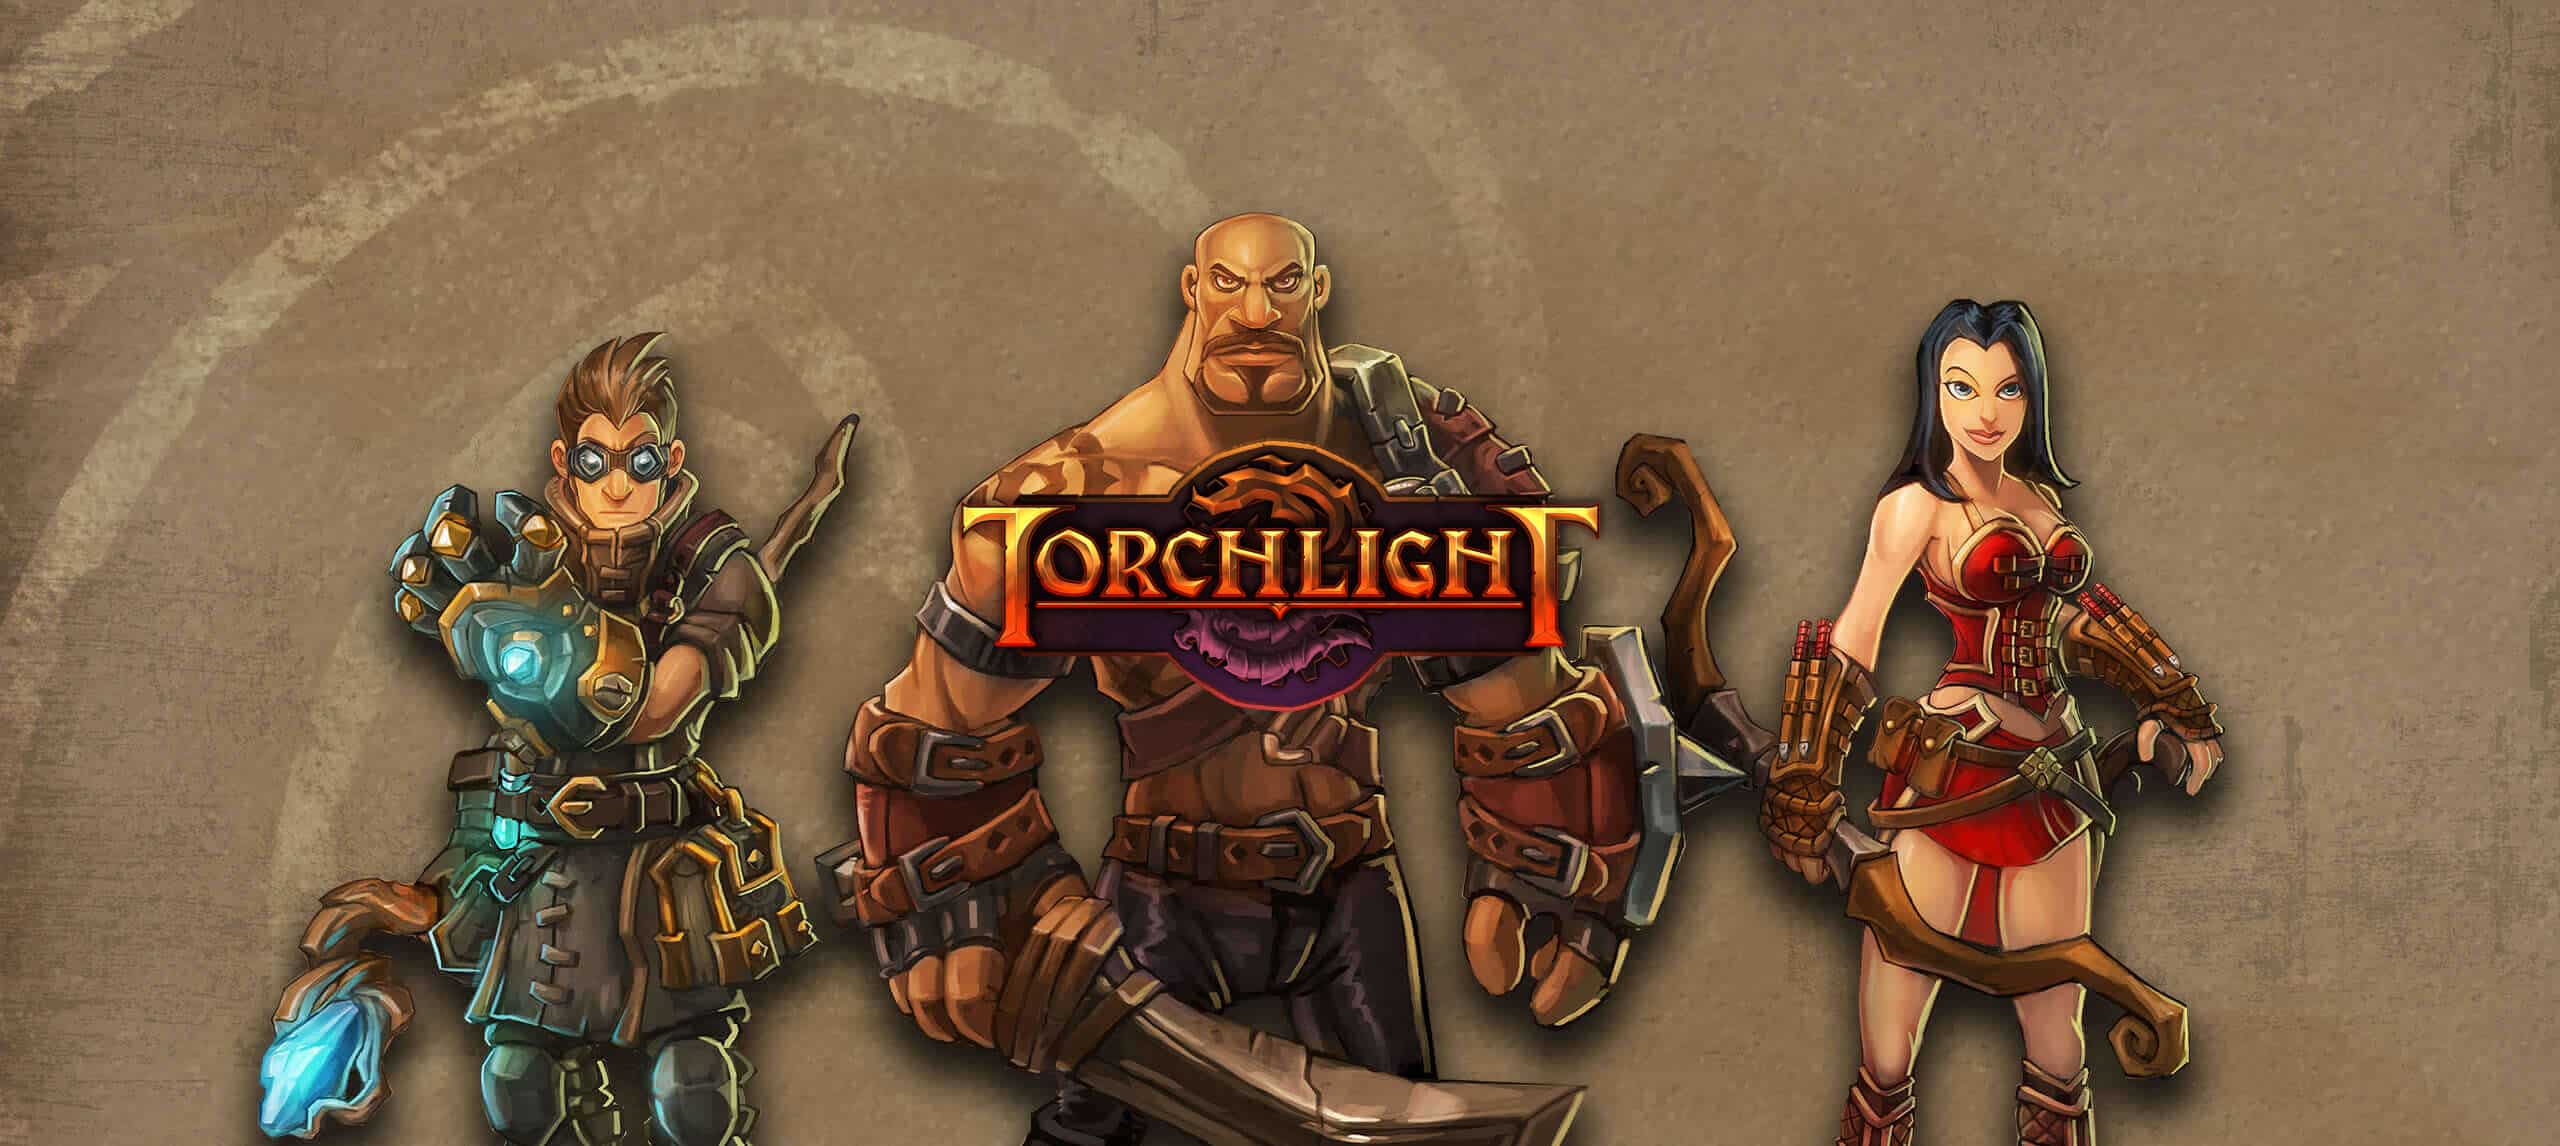 new torchlight game